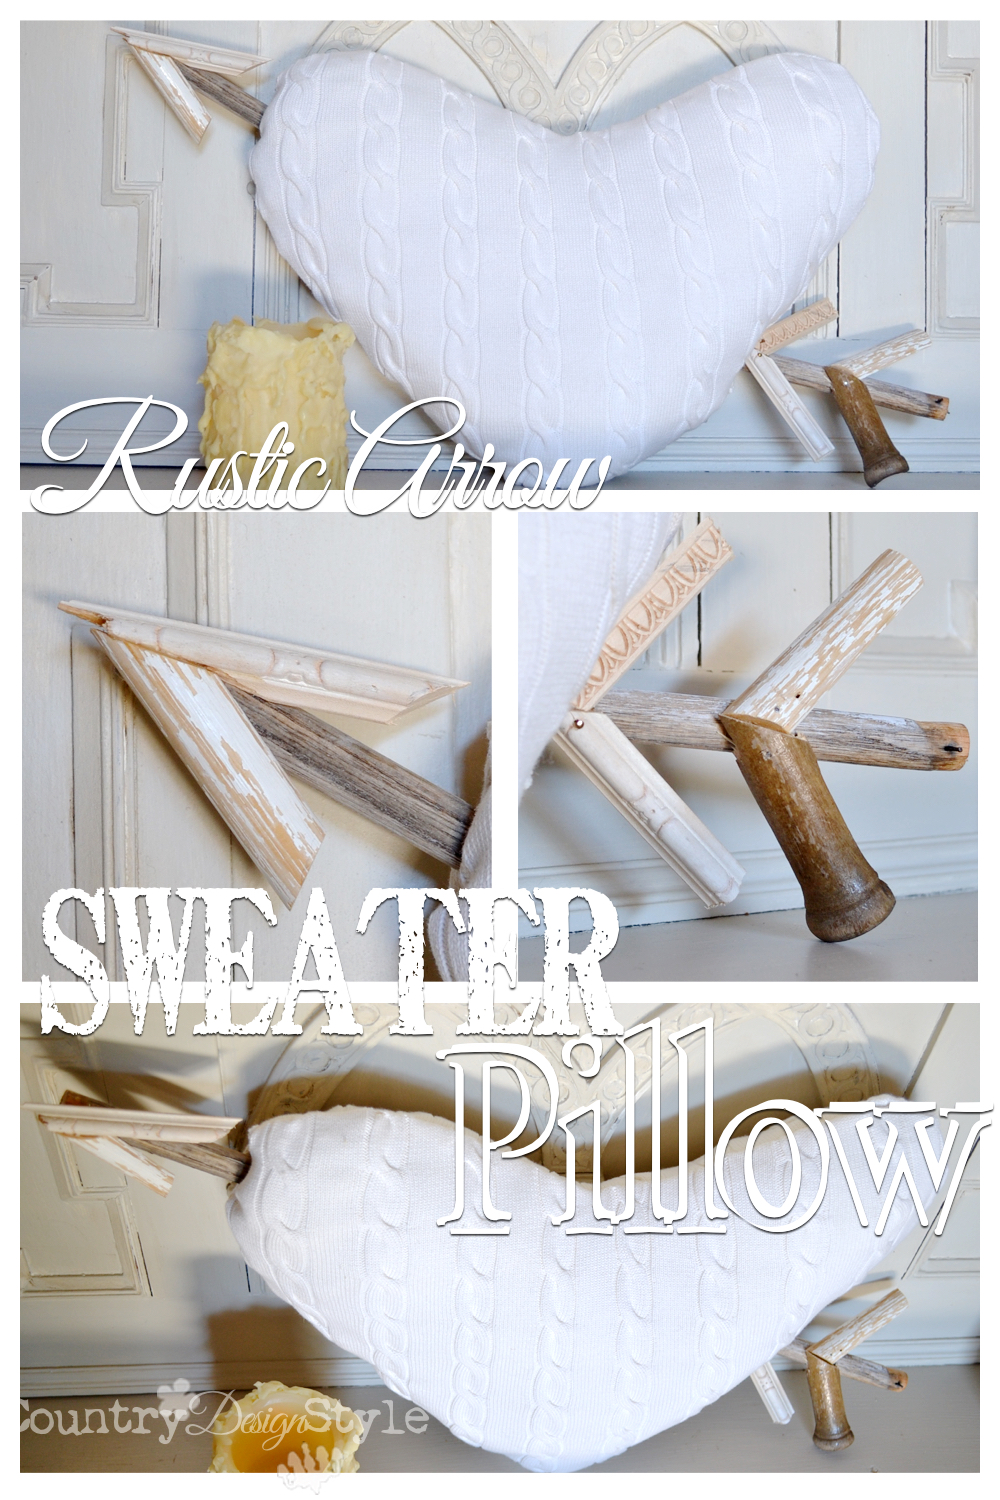 rustic-arrow-sweater-pillow-country-design-style-pn3